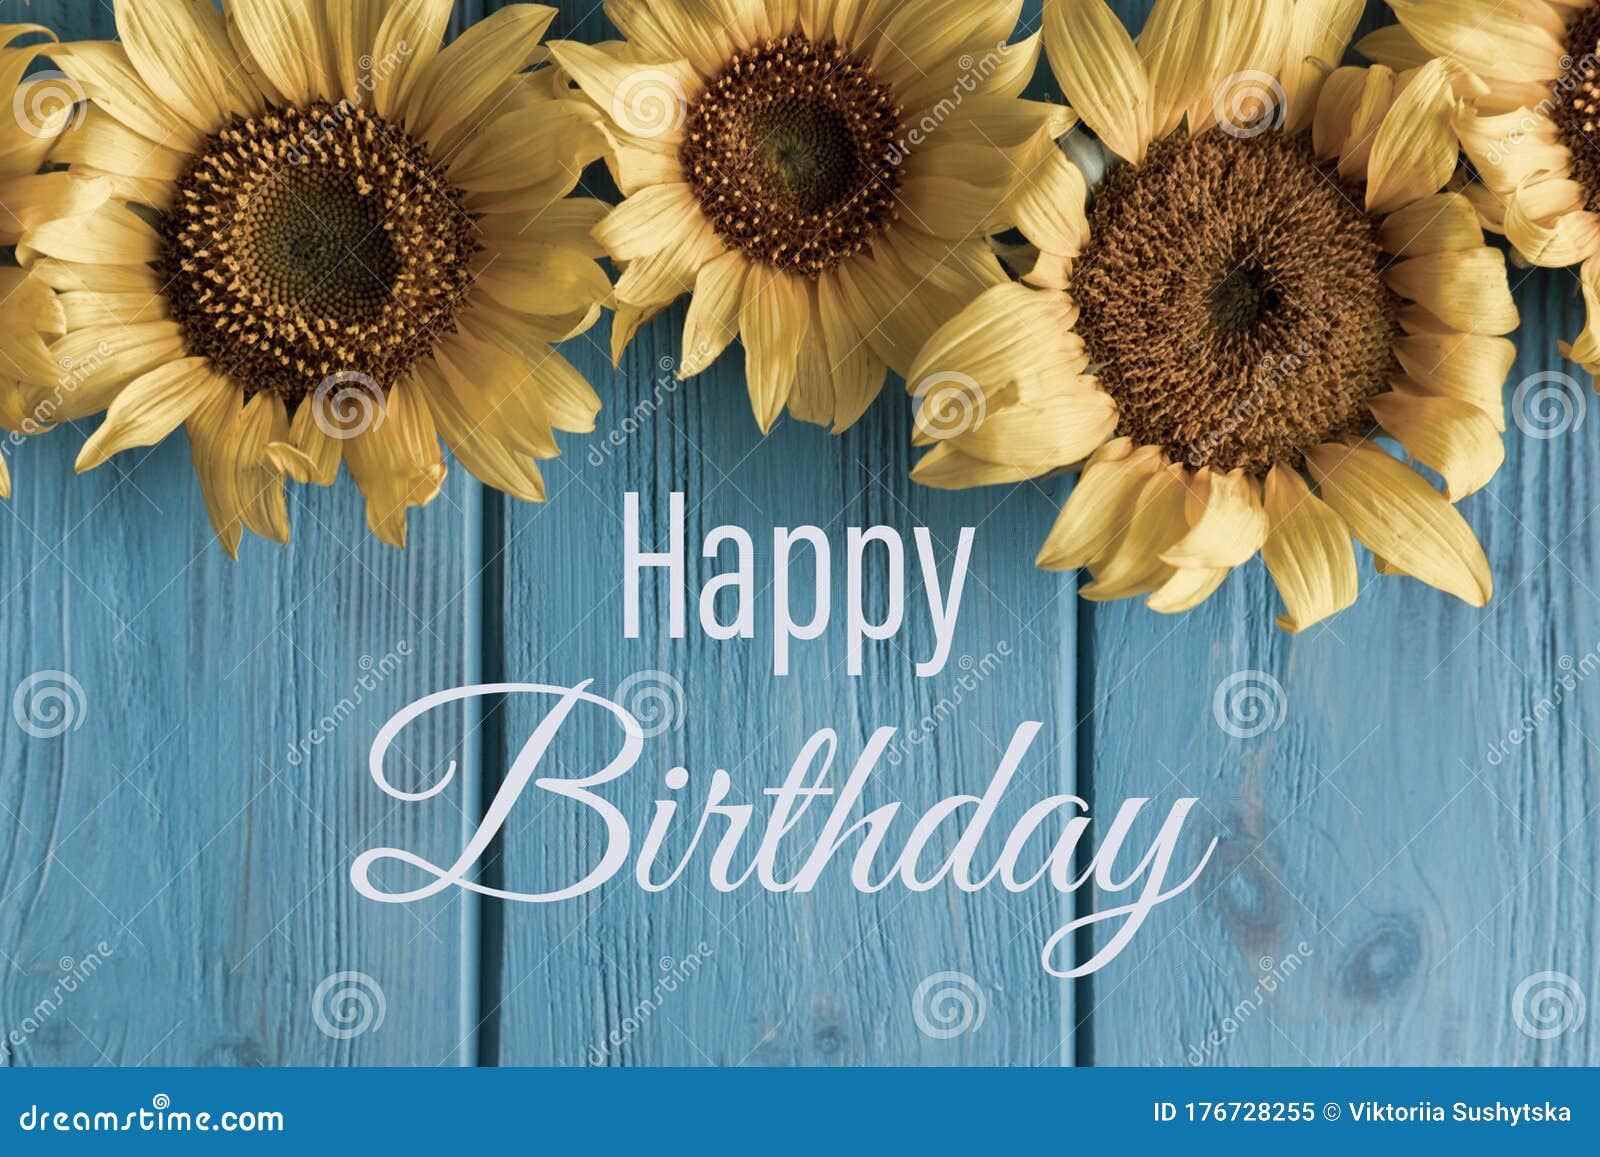 Instant Download 5 x7 Card Sunflowers Printable 'Happy Birthday' Greeting Card